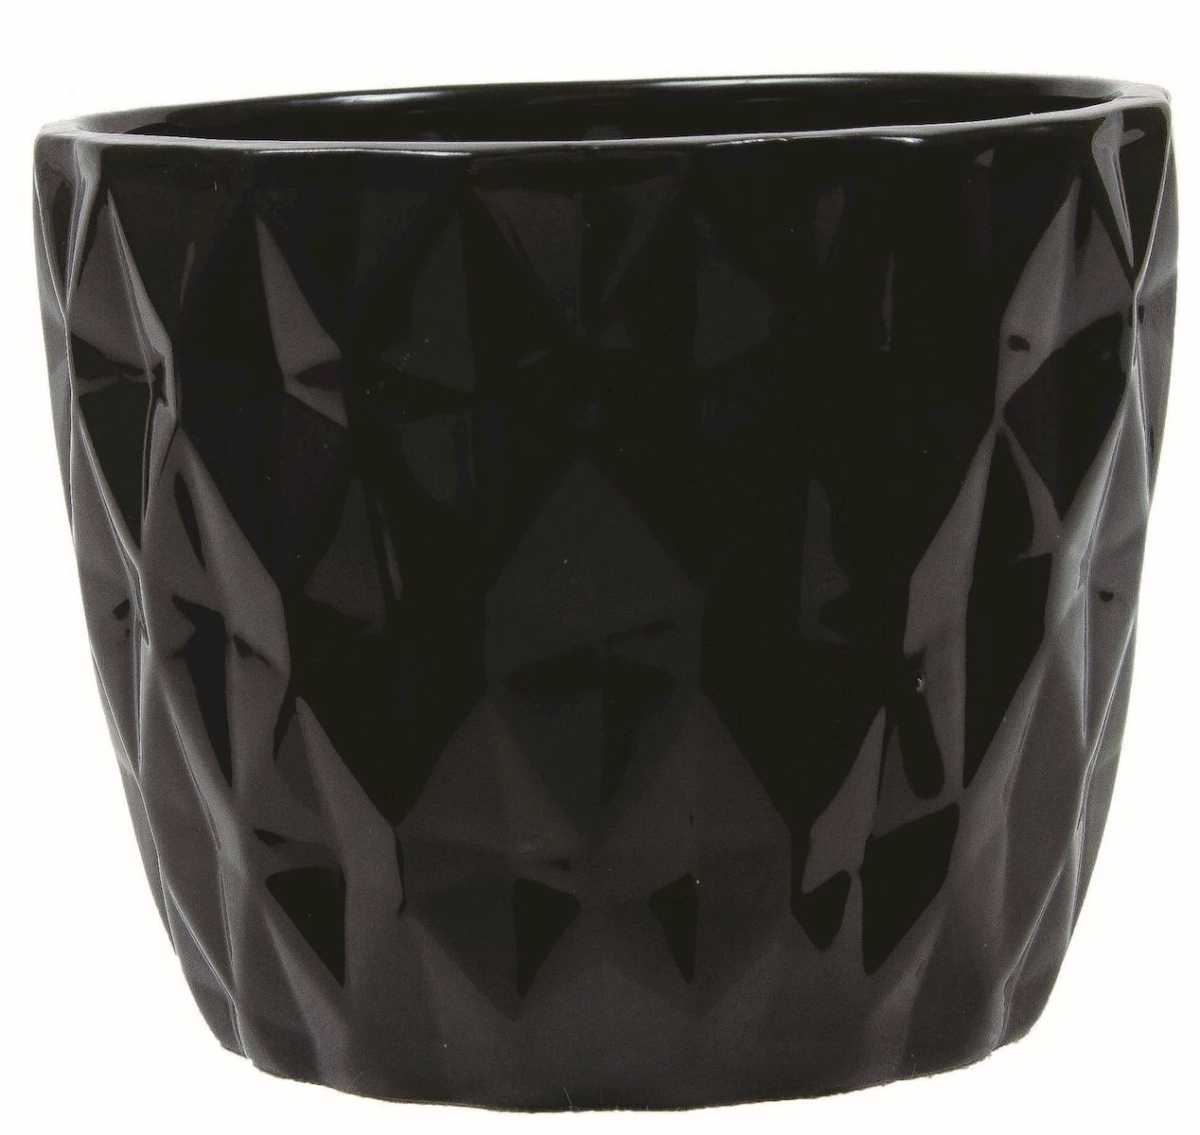 Picture of 212 Main AI-CE10SB Black Patterned Planter